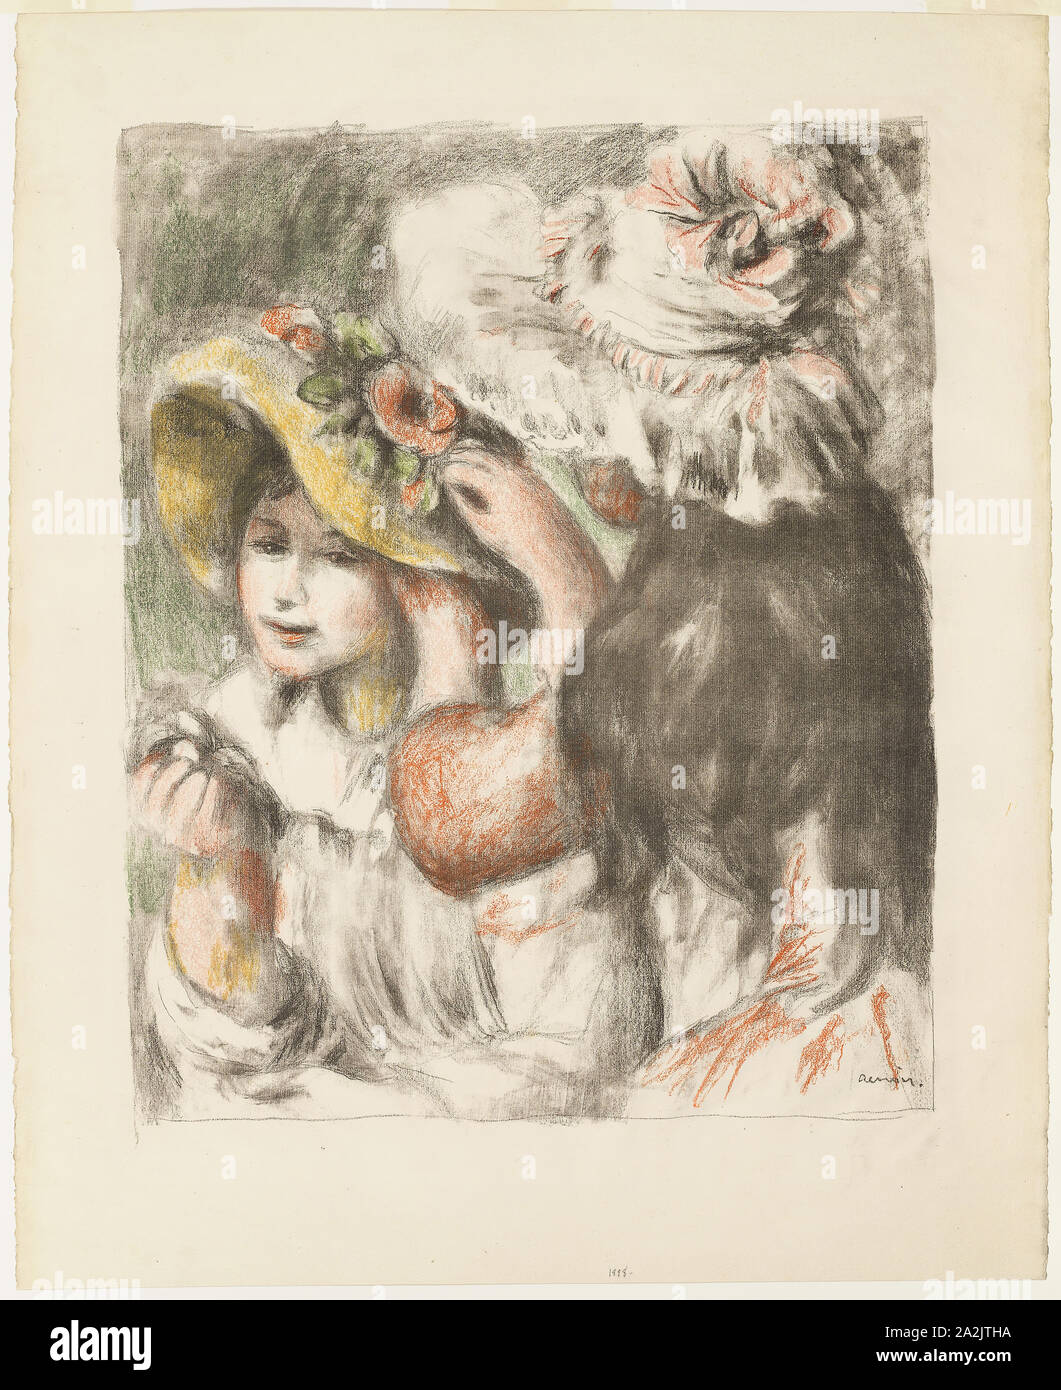 Pinning the Hat, 1898, Pierre Auguste Renoir (French, 1841-1919), printed by Auguste Clot (French, 1858-1936), France, Lithograph from five stones in black, orange, salmon, yellow and green on ivory laid paper, 769 × 625 mm Stock Photo